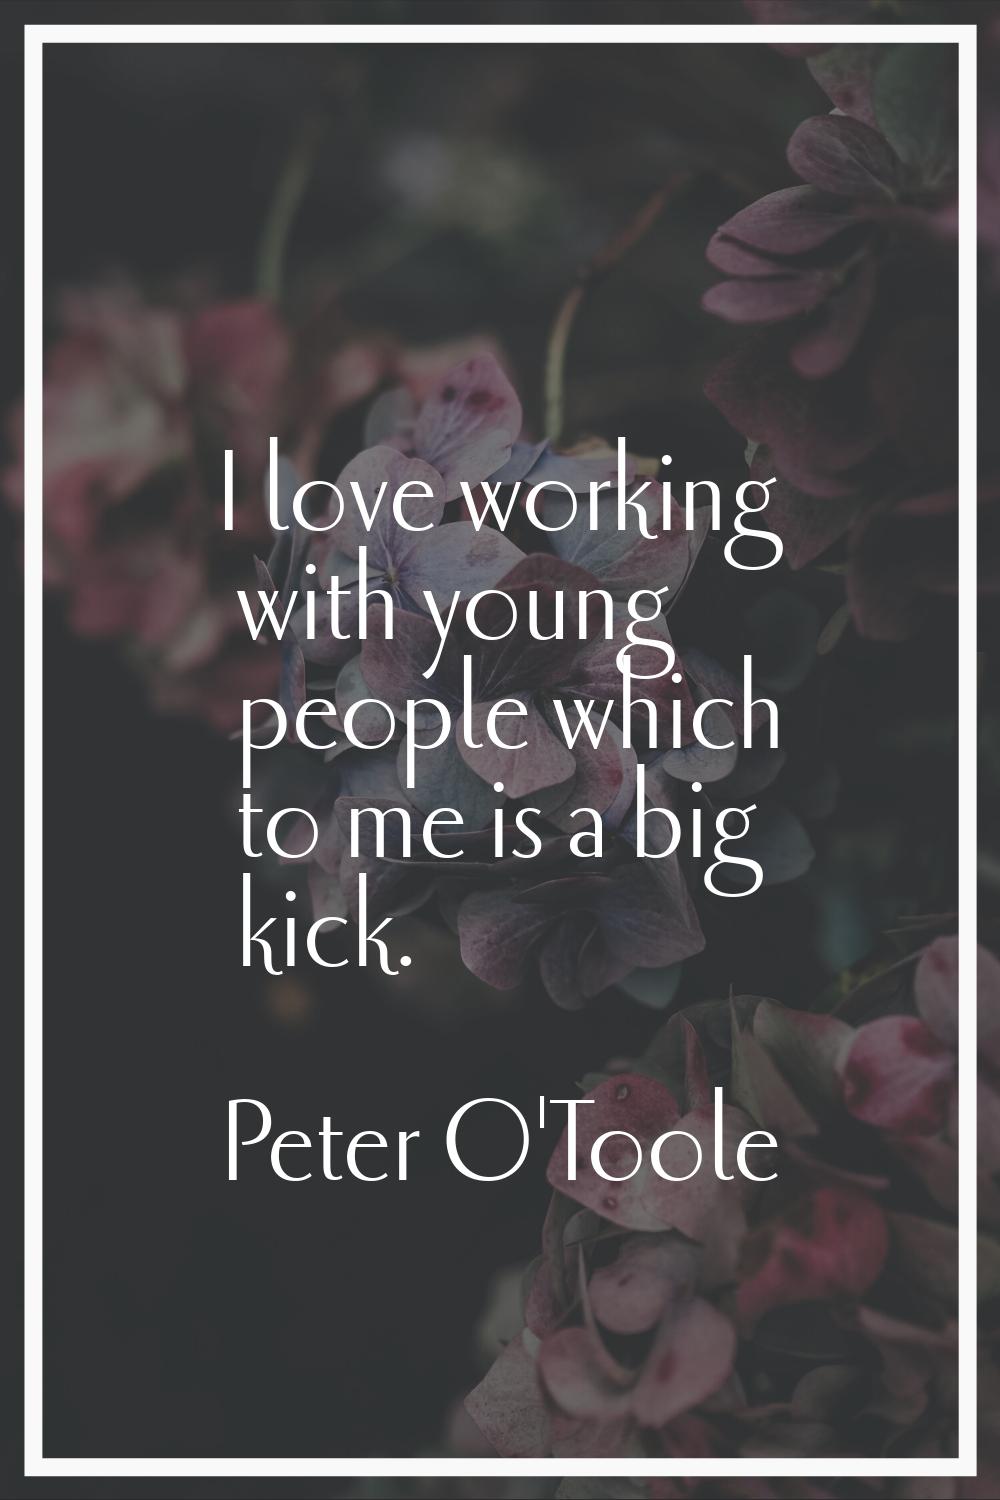 I love working with young people which to me is a big kick.